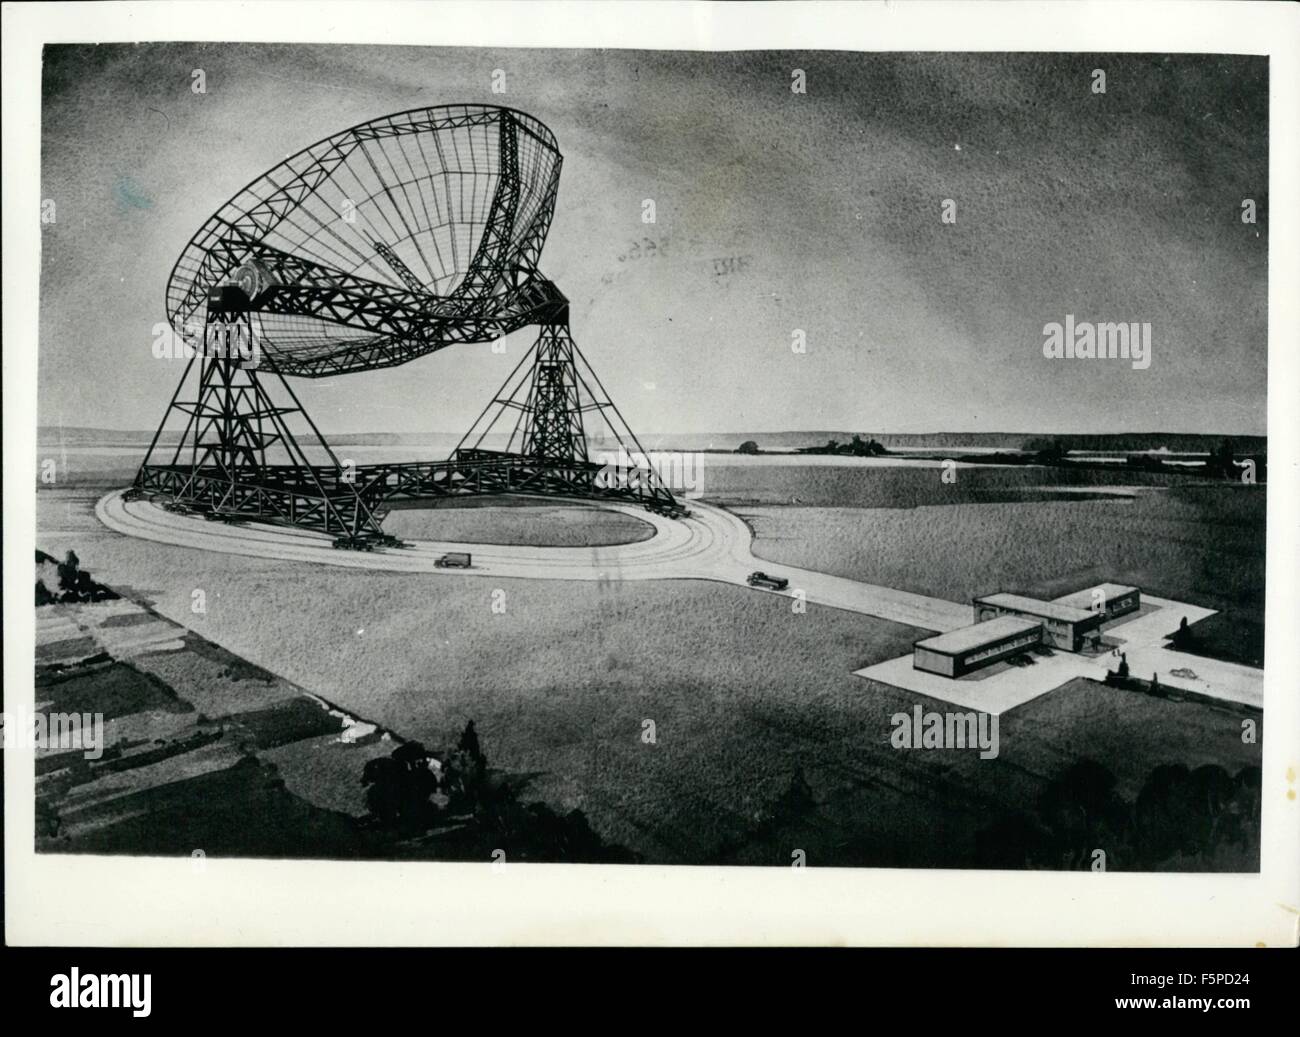 1980 - World largest steerable radio telescope An artist impression of the  radio telescope now being built for Manchester University by Messra Husband  & Co. of Sheffield, at Jodrell Bank Experimental Station